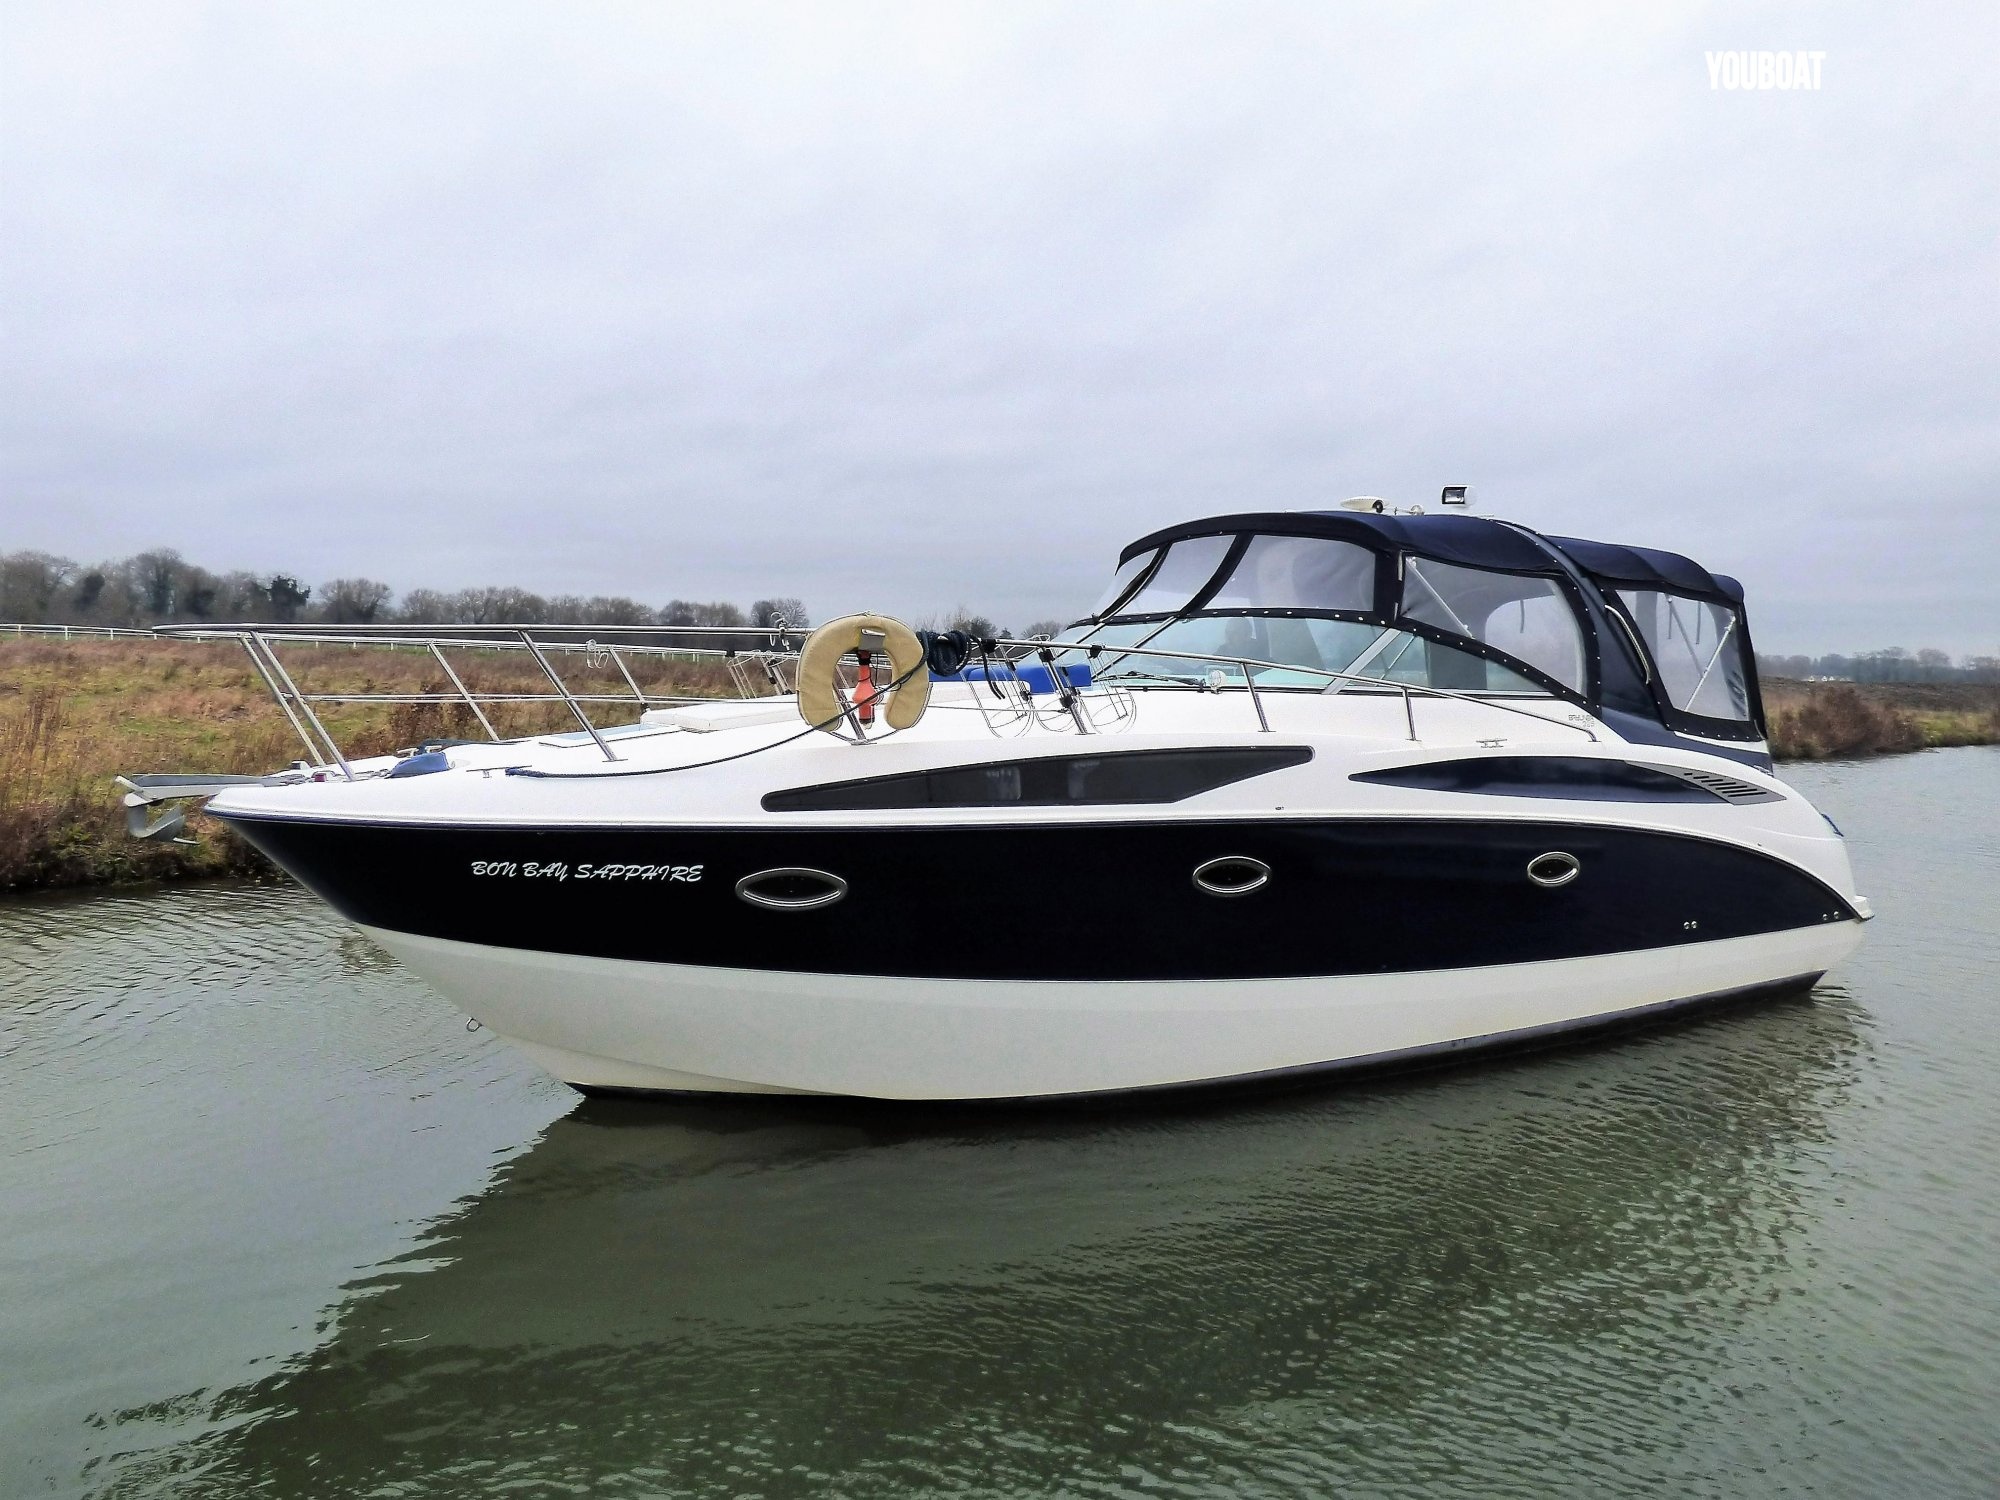 Pleasure Boat: Bayliner 325 Cruiser, Vessel for fishing or touring. 2000x1500 HD Background.